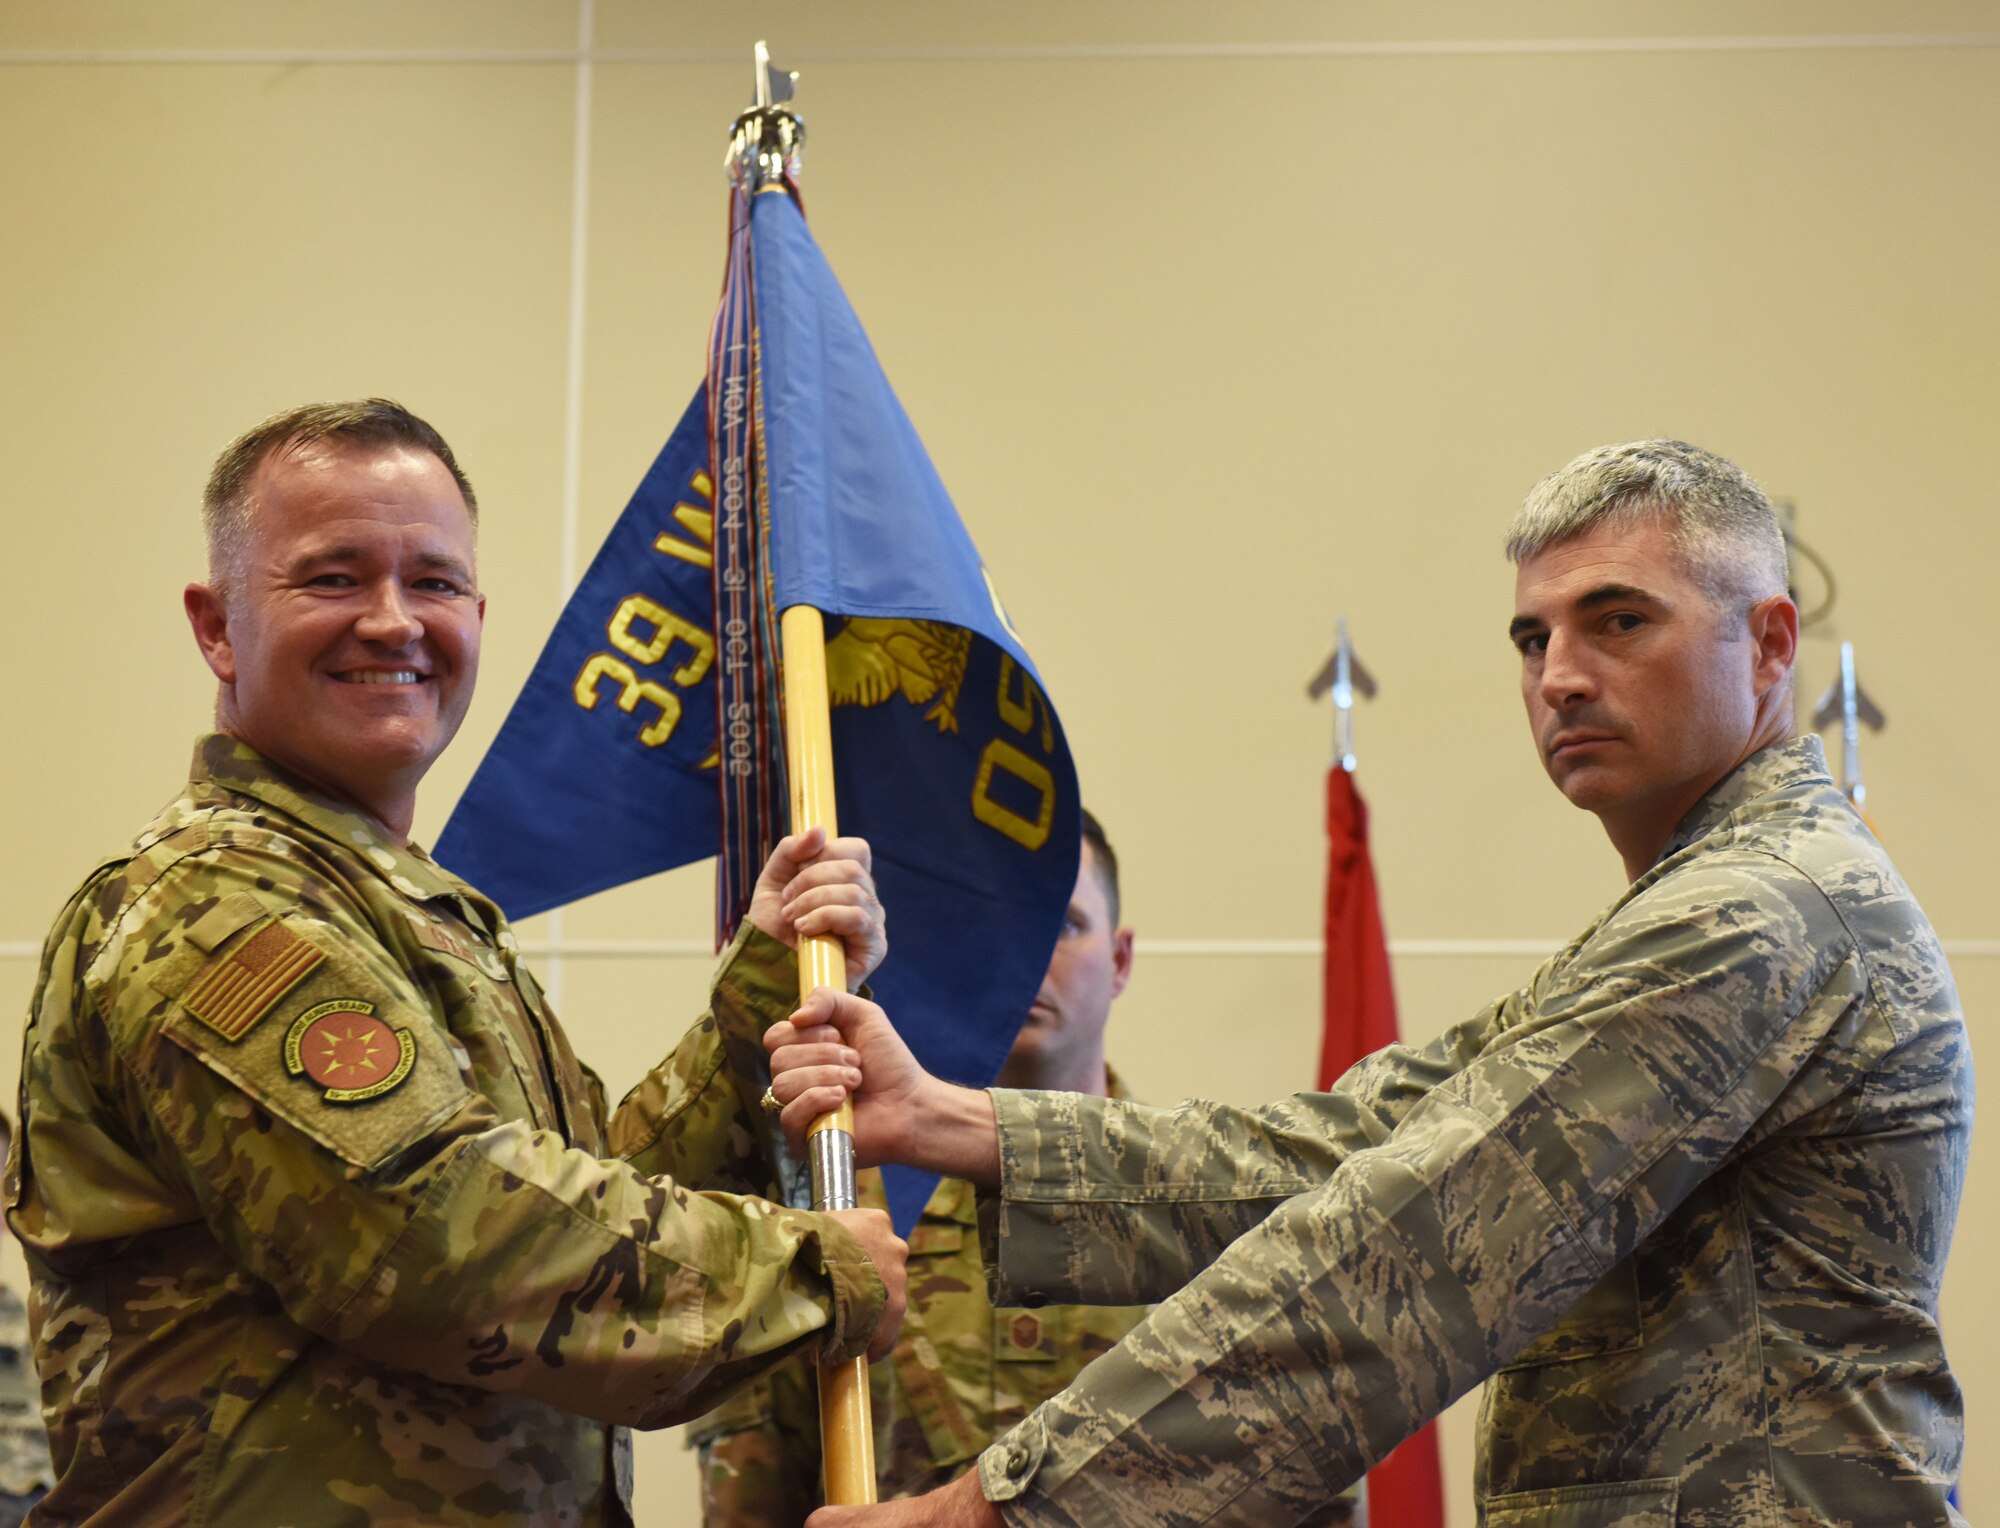 Col. Paul R. Quigley, 39th Weapons System Security Group commander, left, presents the Meritorious Service Medal to Lt. Col. John A. Talafuse, outgoing 39th Operations Support Squadron commander, during a change of command ceremony June 6, 2019, on Incirlik Air Base, Turkey. During his time as commander, Talafuse oversaw 80,000 operations at the U.S. Air Force’s busiest air traffic control complex in Europe. (U.S. Air Force photo by Senior Airman Joshua Magbanua)